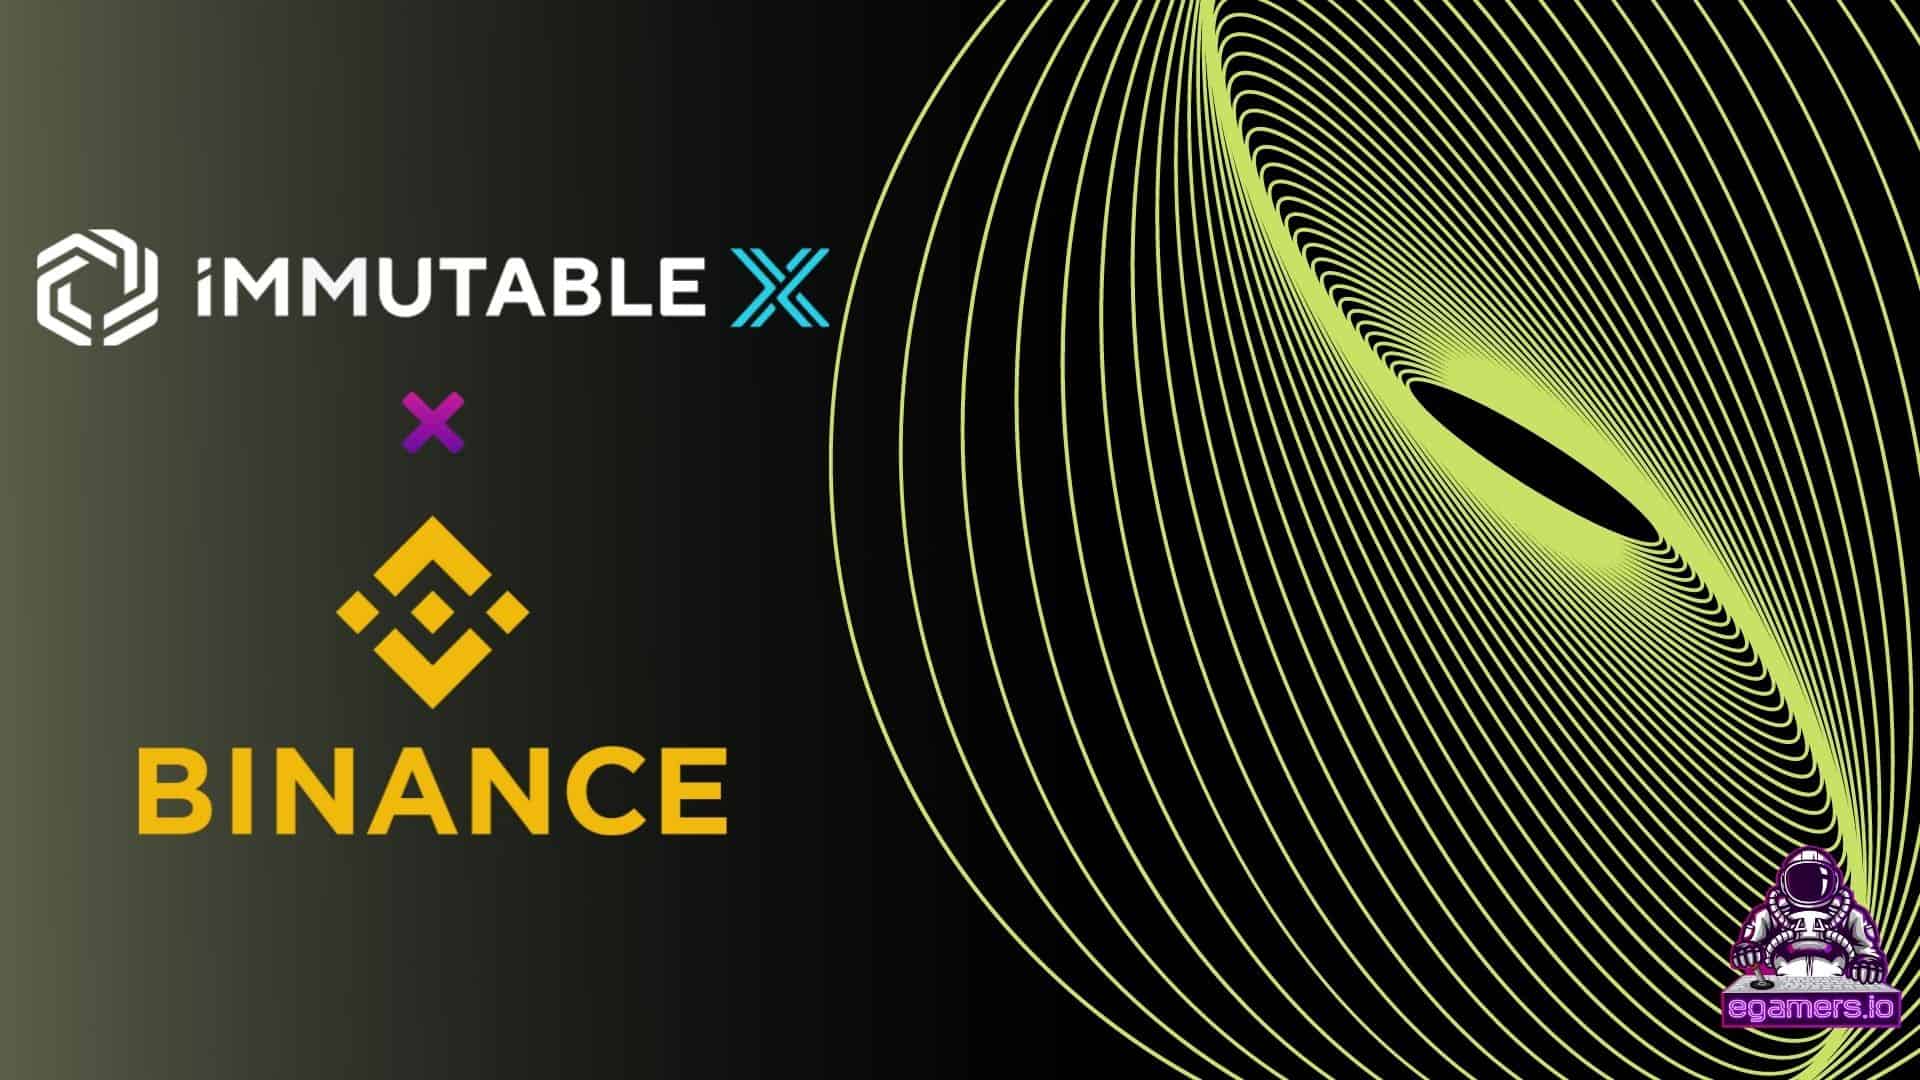 Binance Will List Immutable X IMX Token As Announced Today Immutable X's token, IMX was listed today on Binance with the token reaching an all-time high price at  and currently trading at ,6.